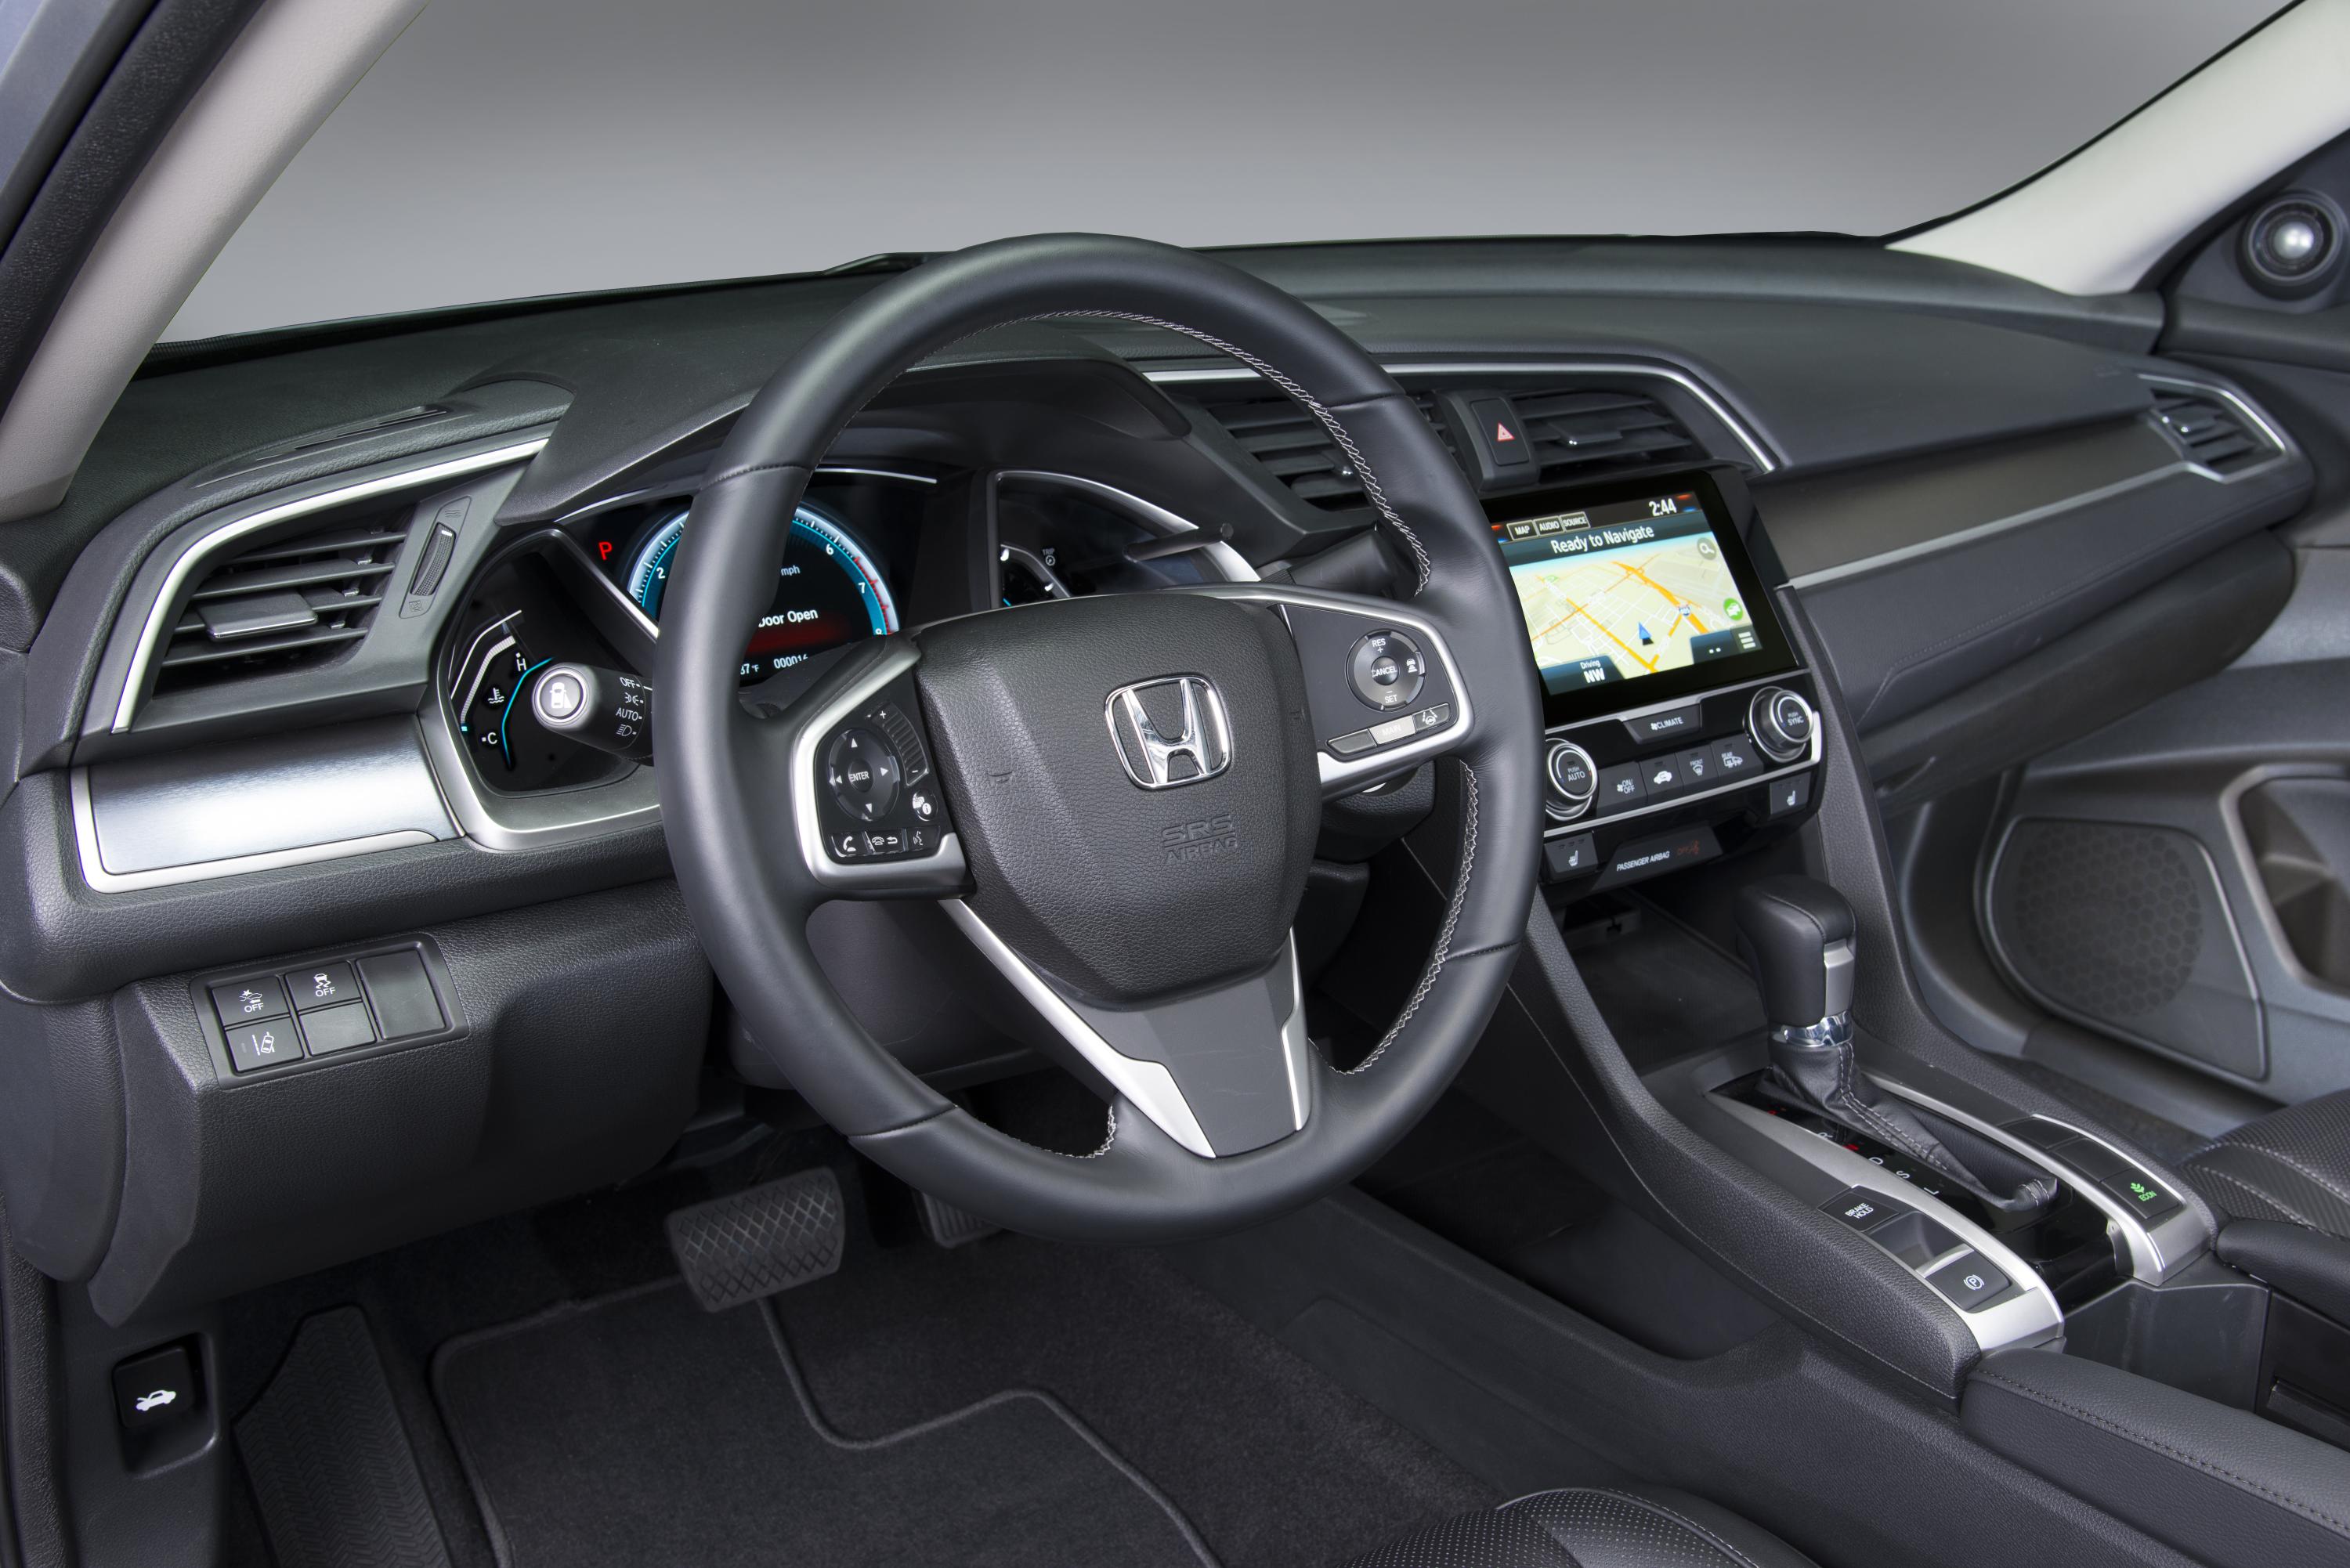 All-new Honda Civic 5-door to arrive in late-2016 - Report